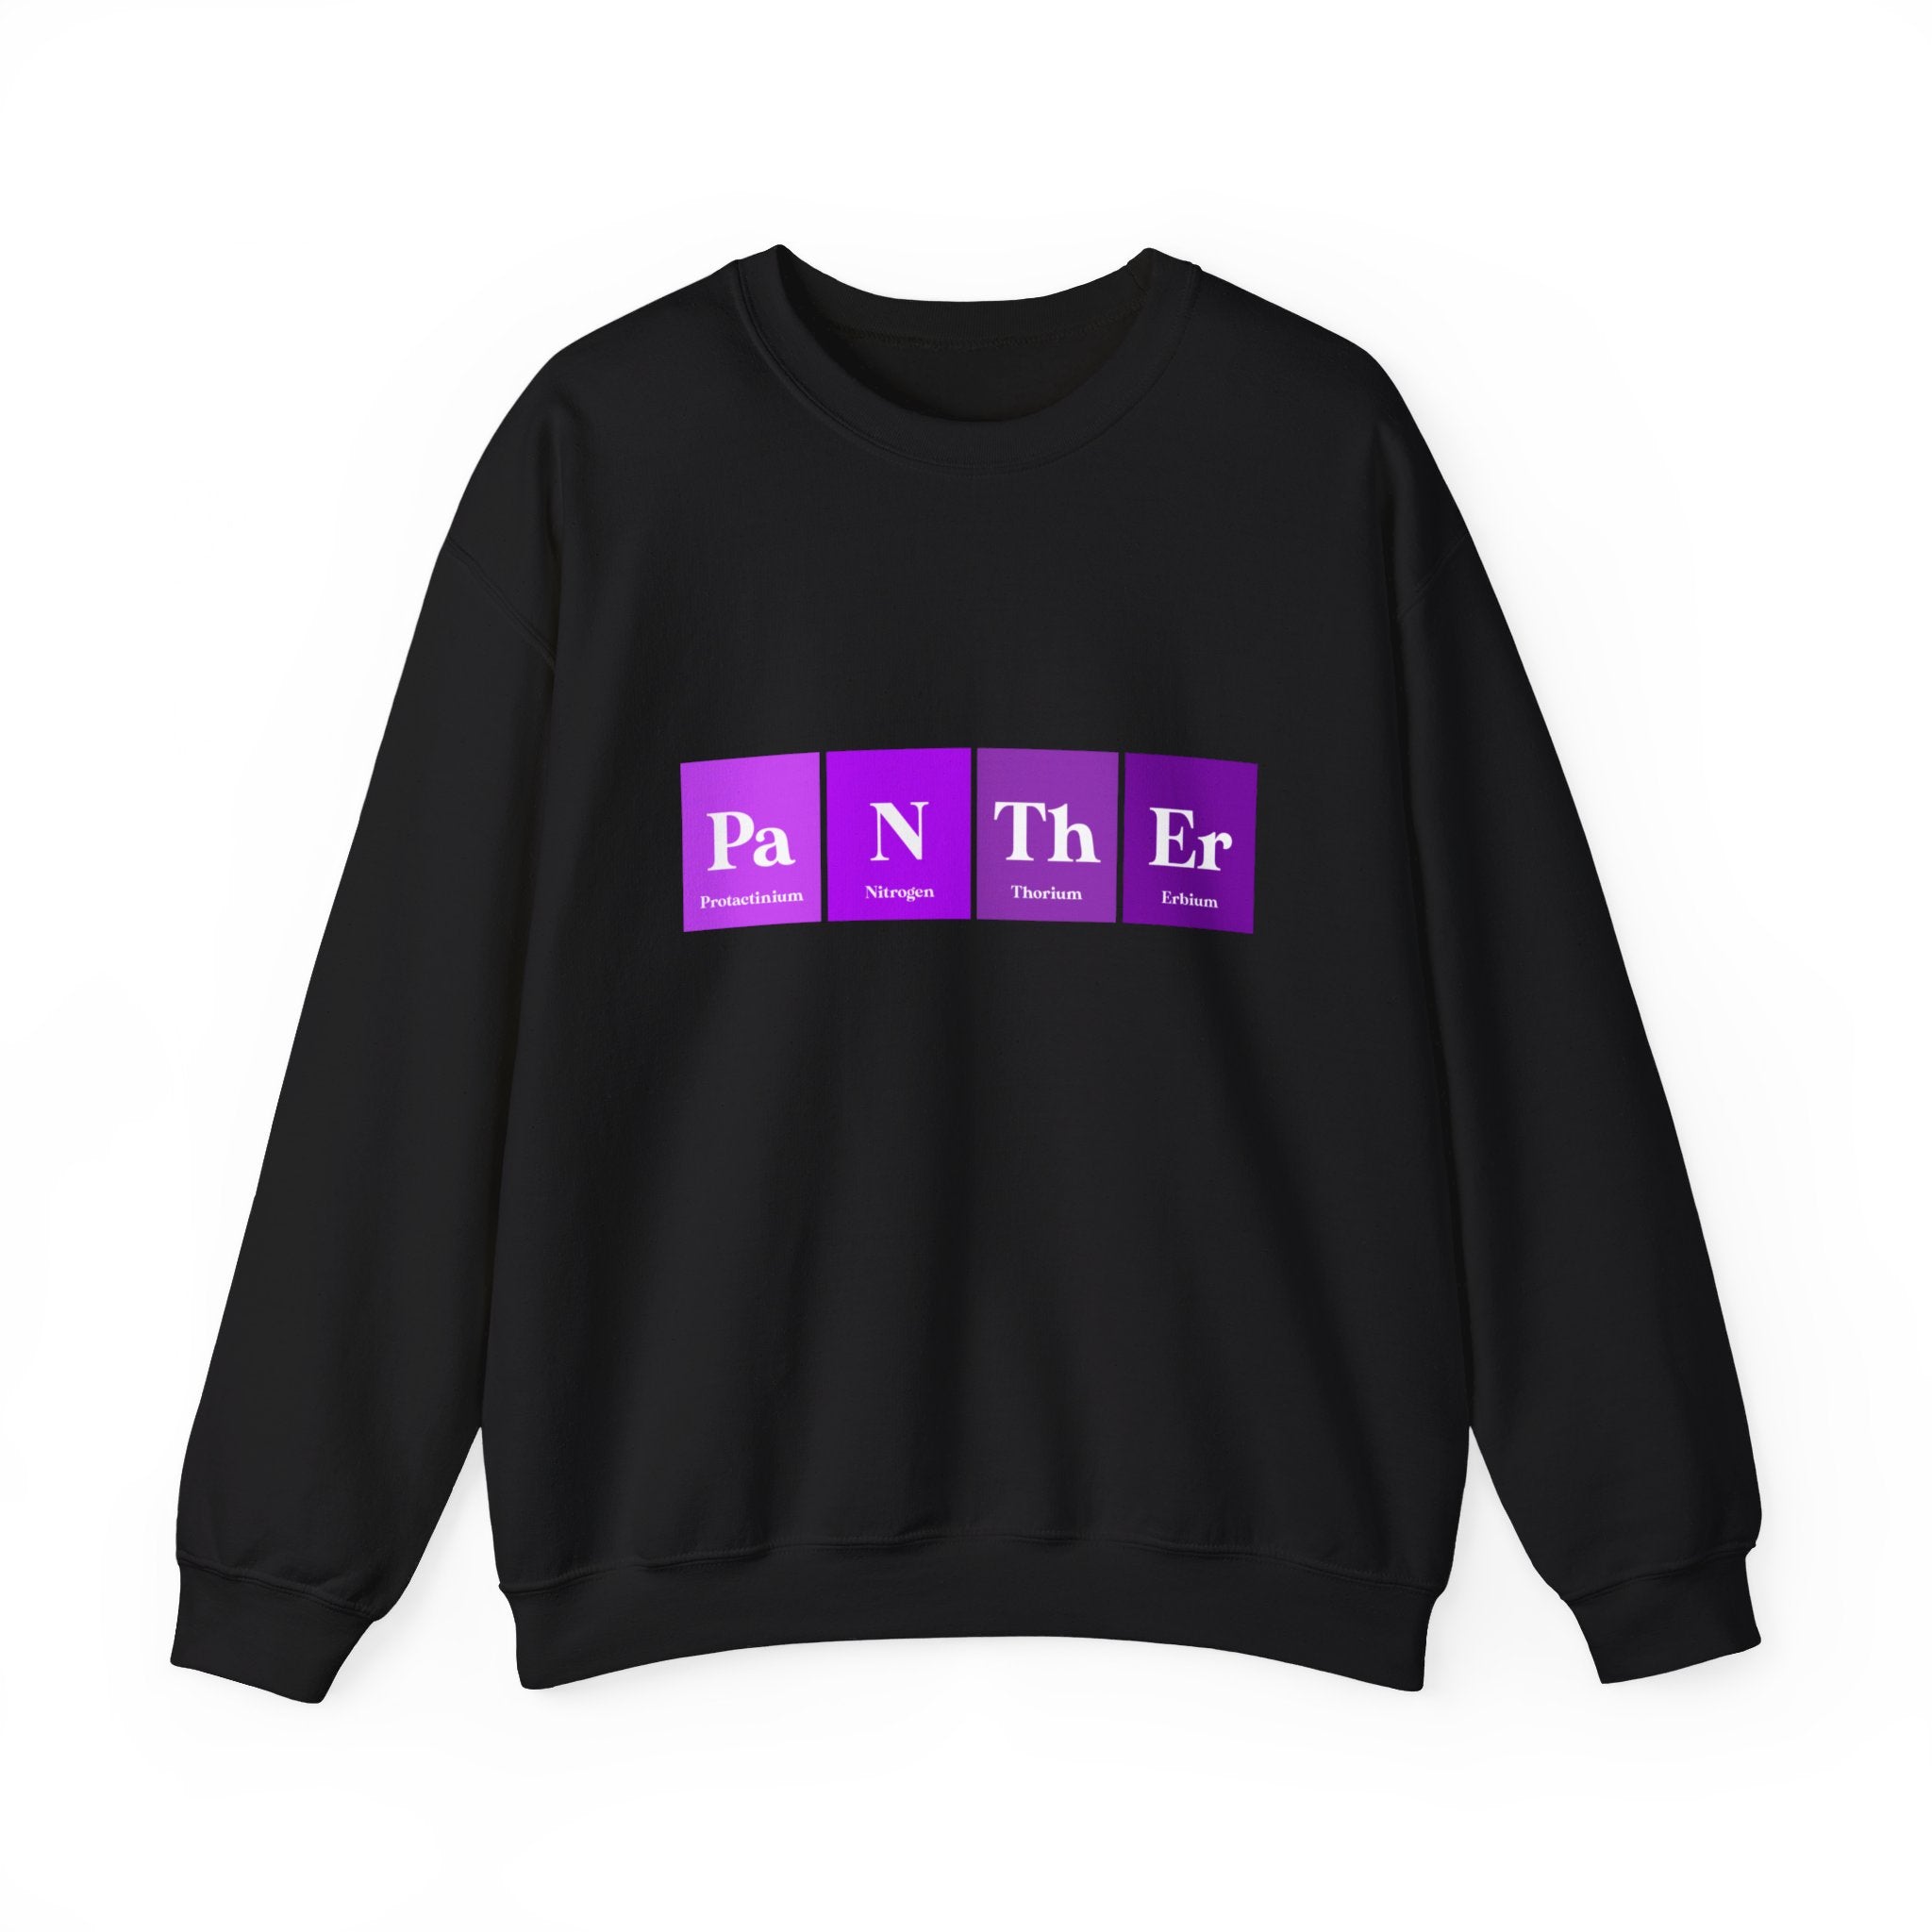 Pa-N-Th-Er - Sweatshirt: Ultra-soft black sweatshirt with three periodic table-inspired purple squares spelling out "Panther," featuring elements Pa, N, and Th Er. Cozy and stylish for any casual outing.